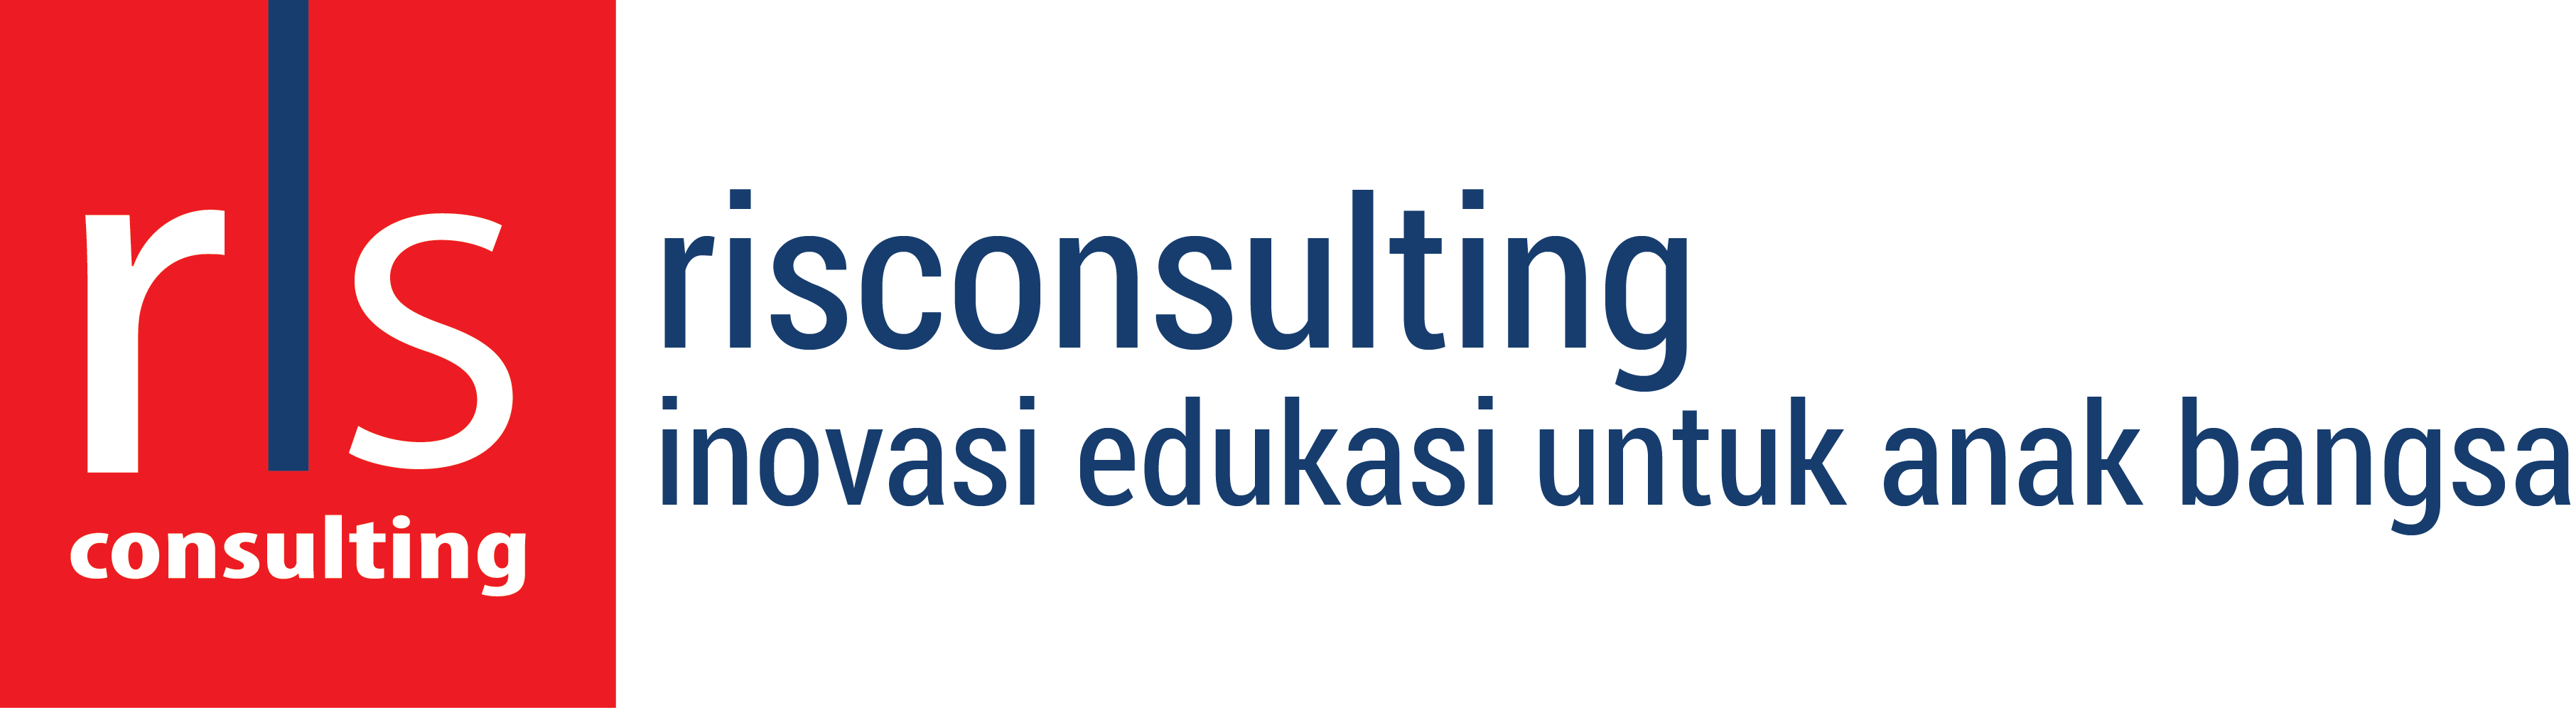 Risconsulting